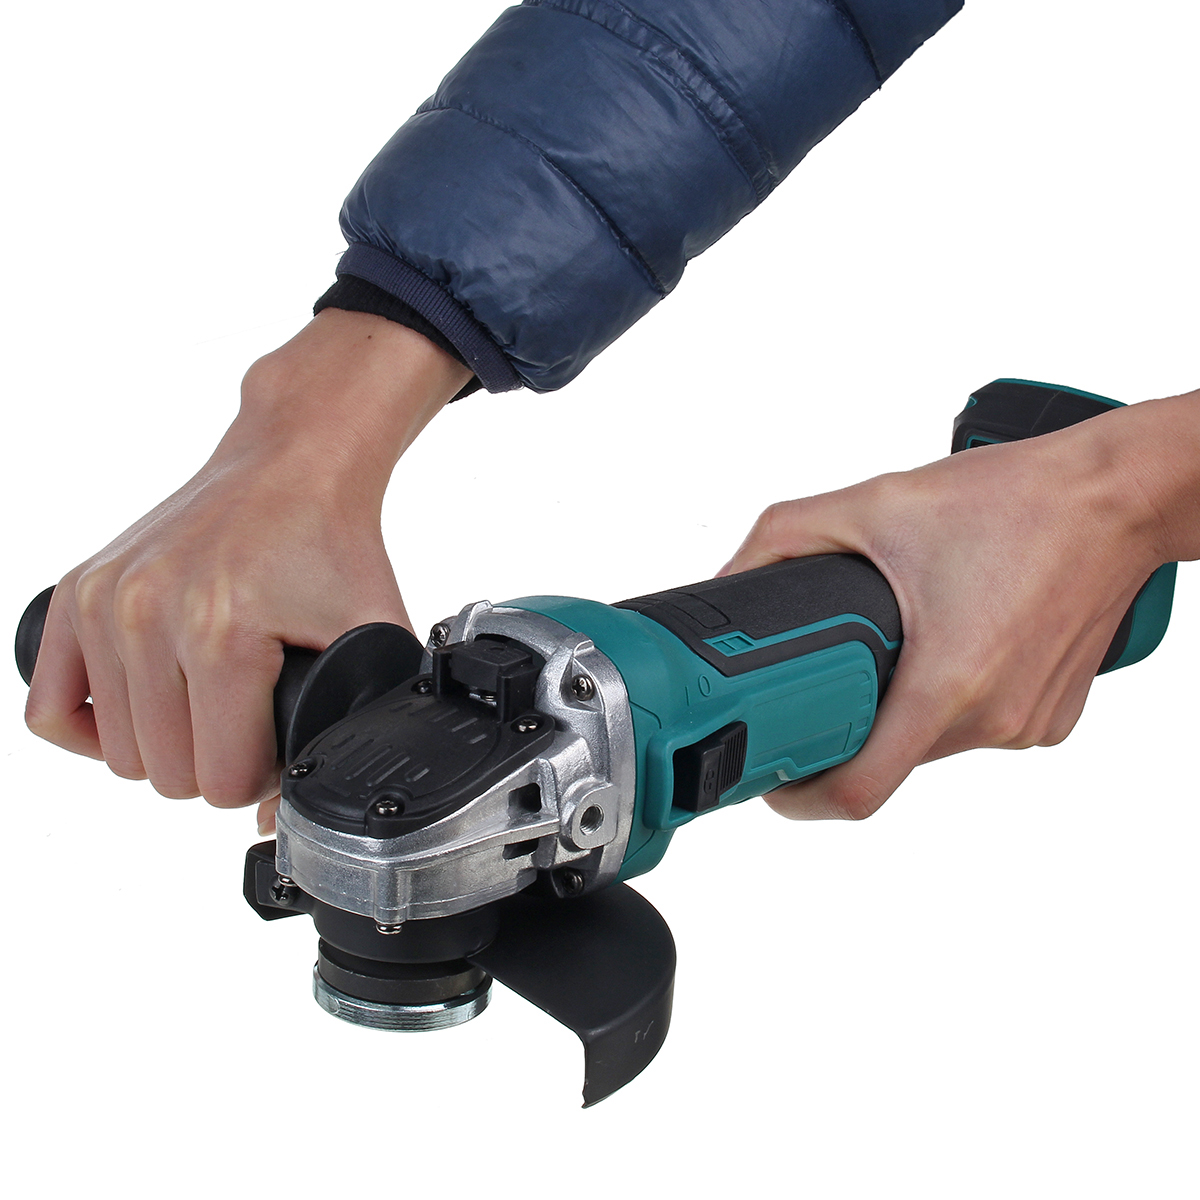 125mm-800W-Cordless-Brushless-Angle-Grinder-Cutting-Tool-Variable-Speed-Electric-Polisher-For-Makita-1825761-7